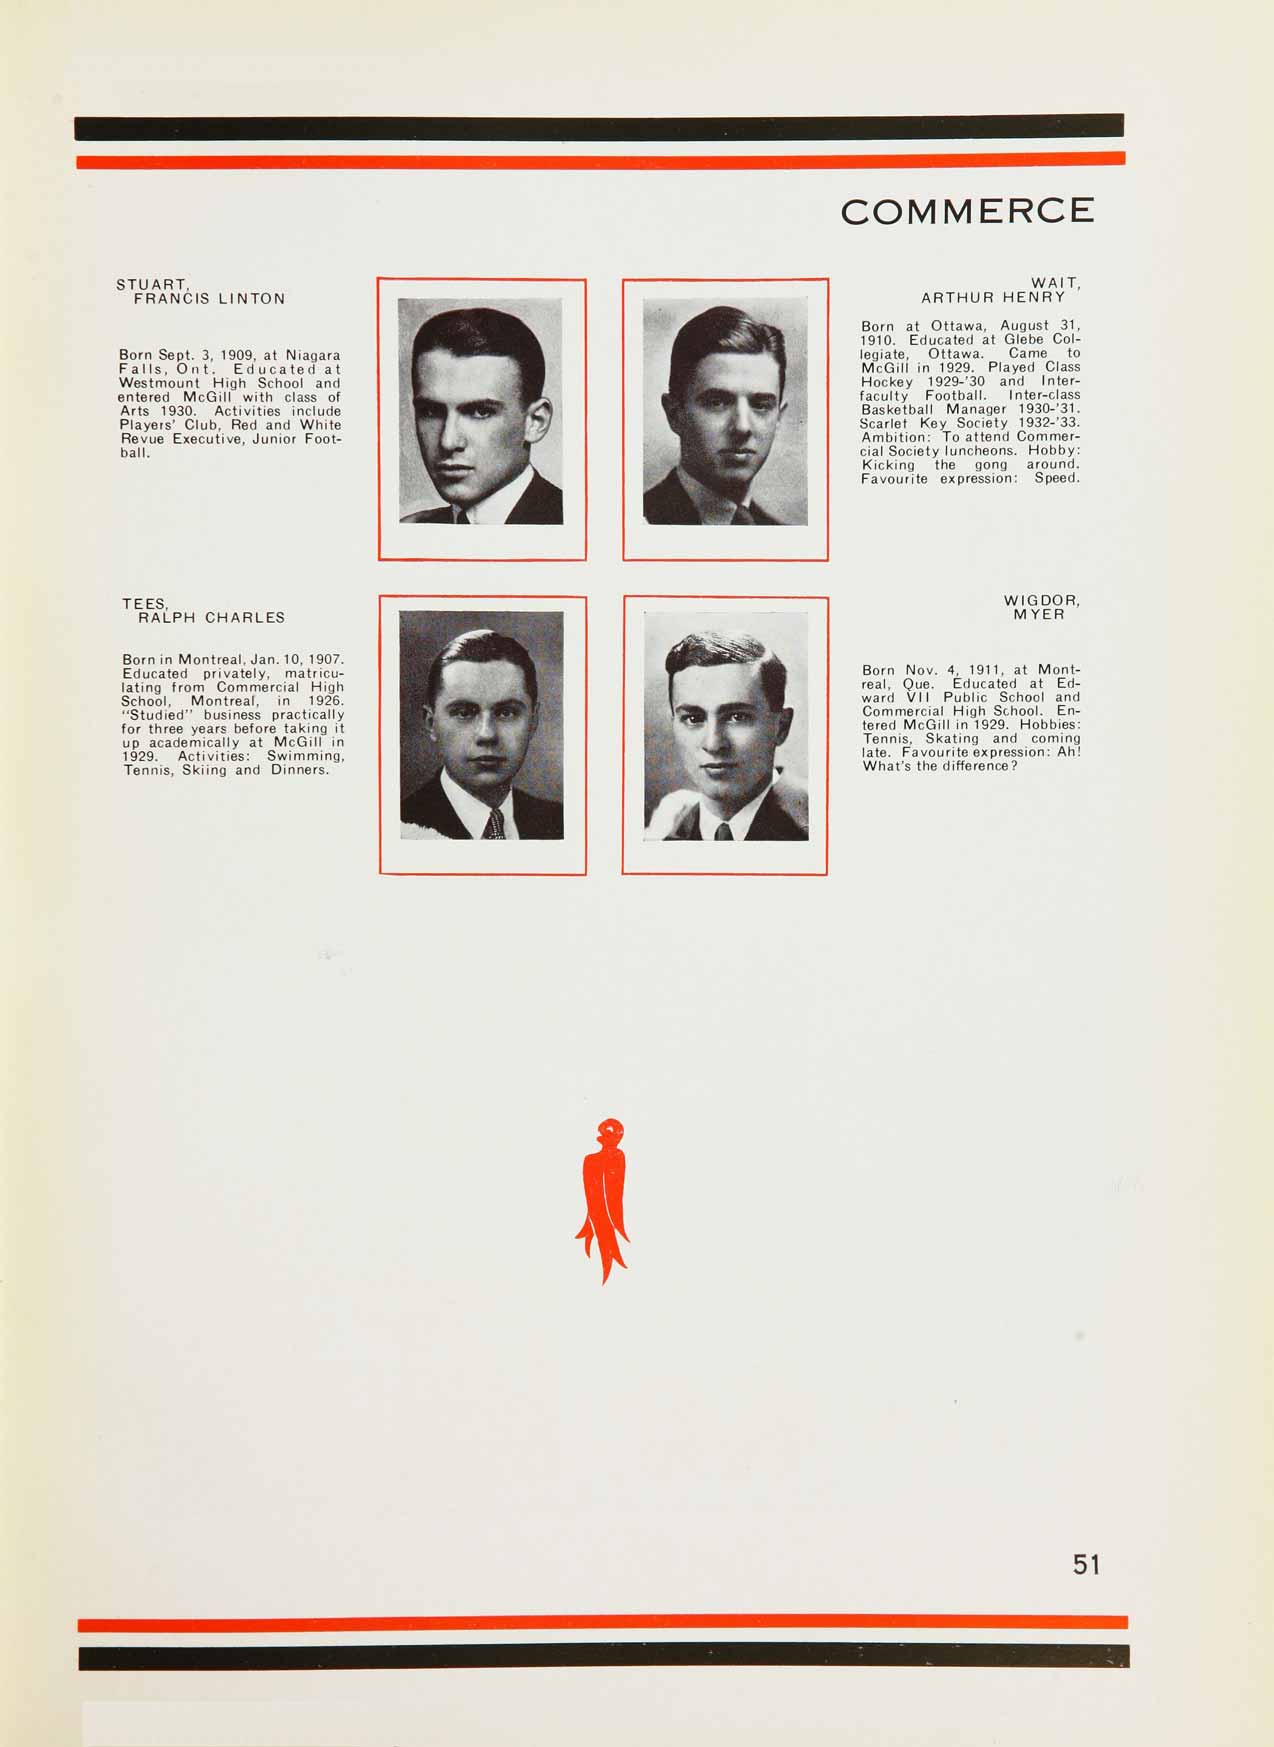 McGill Yearbook: 1933